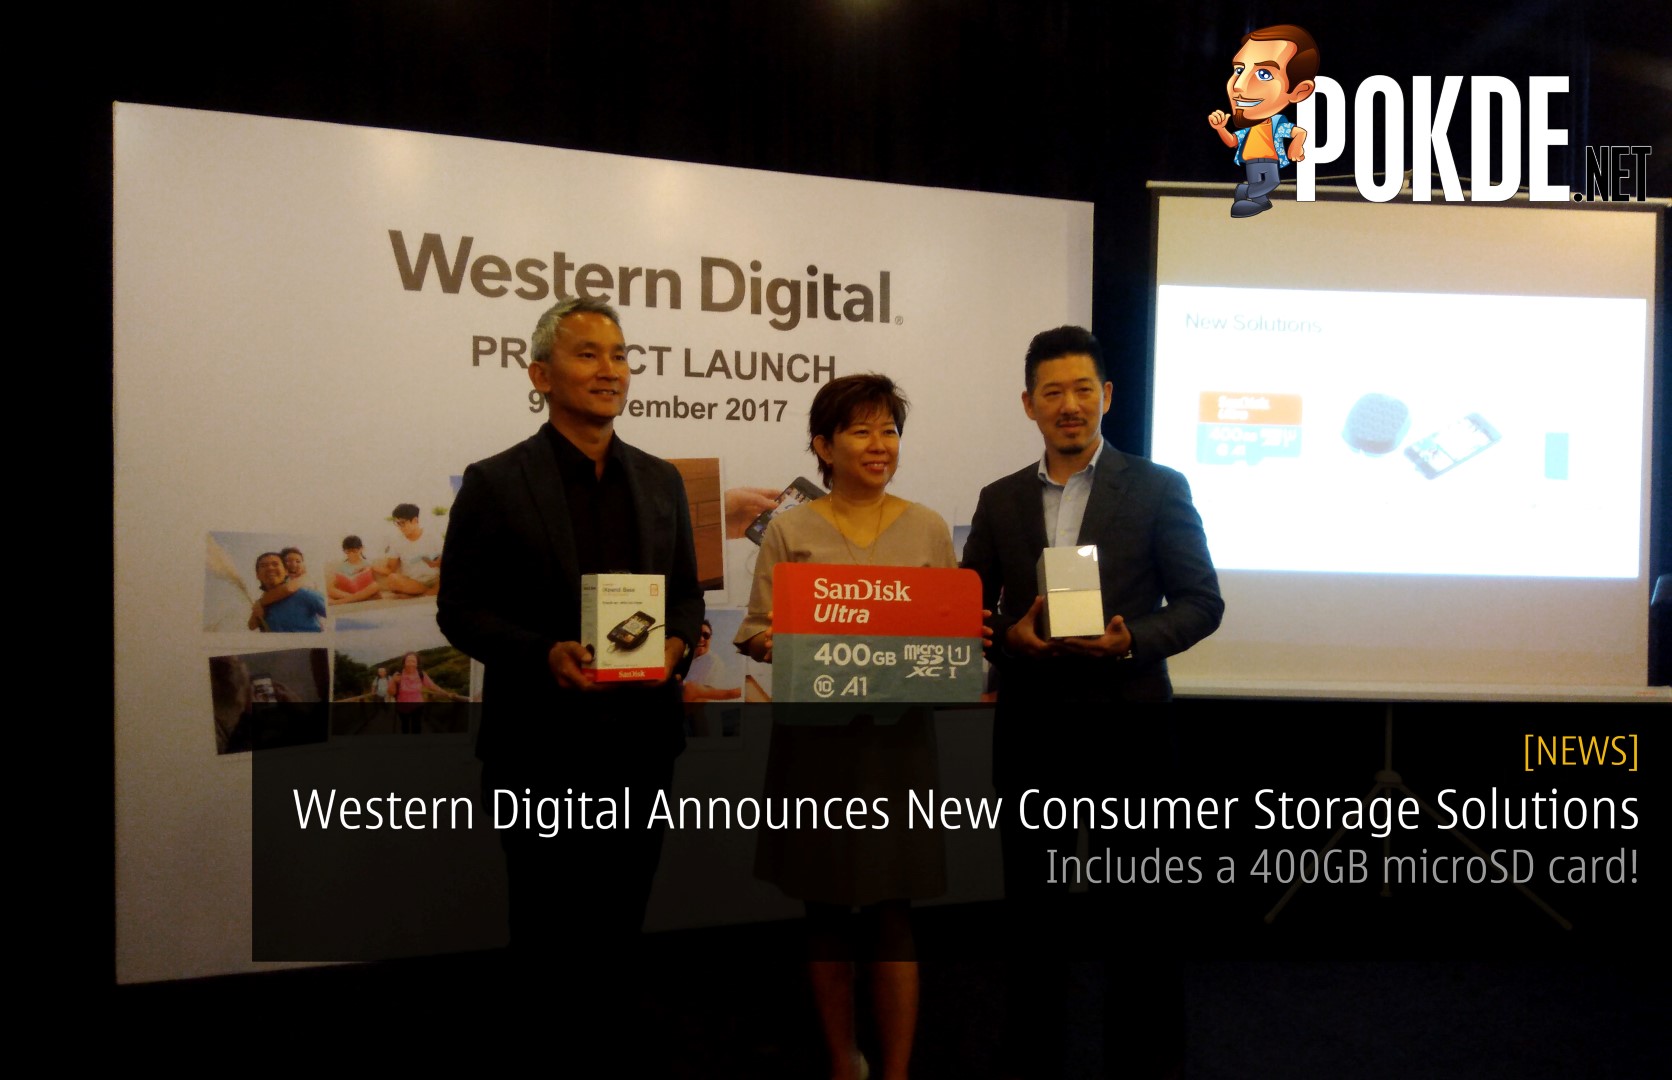 Western Digital Announces New Consumer Storage Solutions - Includes a 400GB microSD card! 32